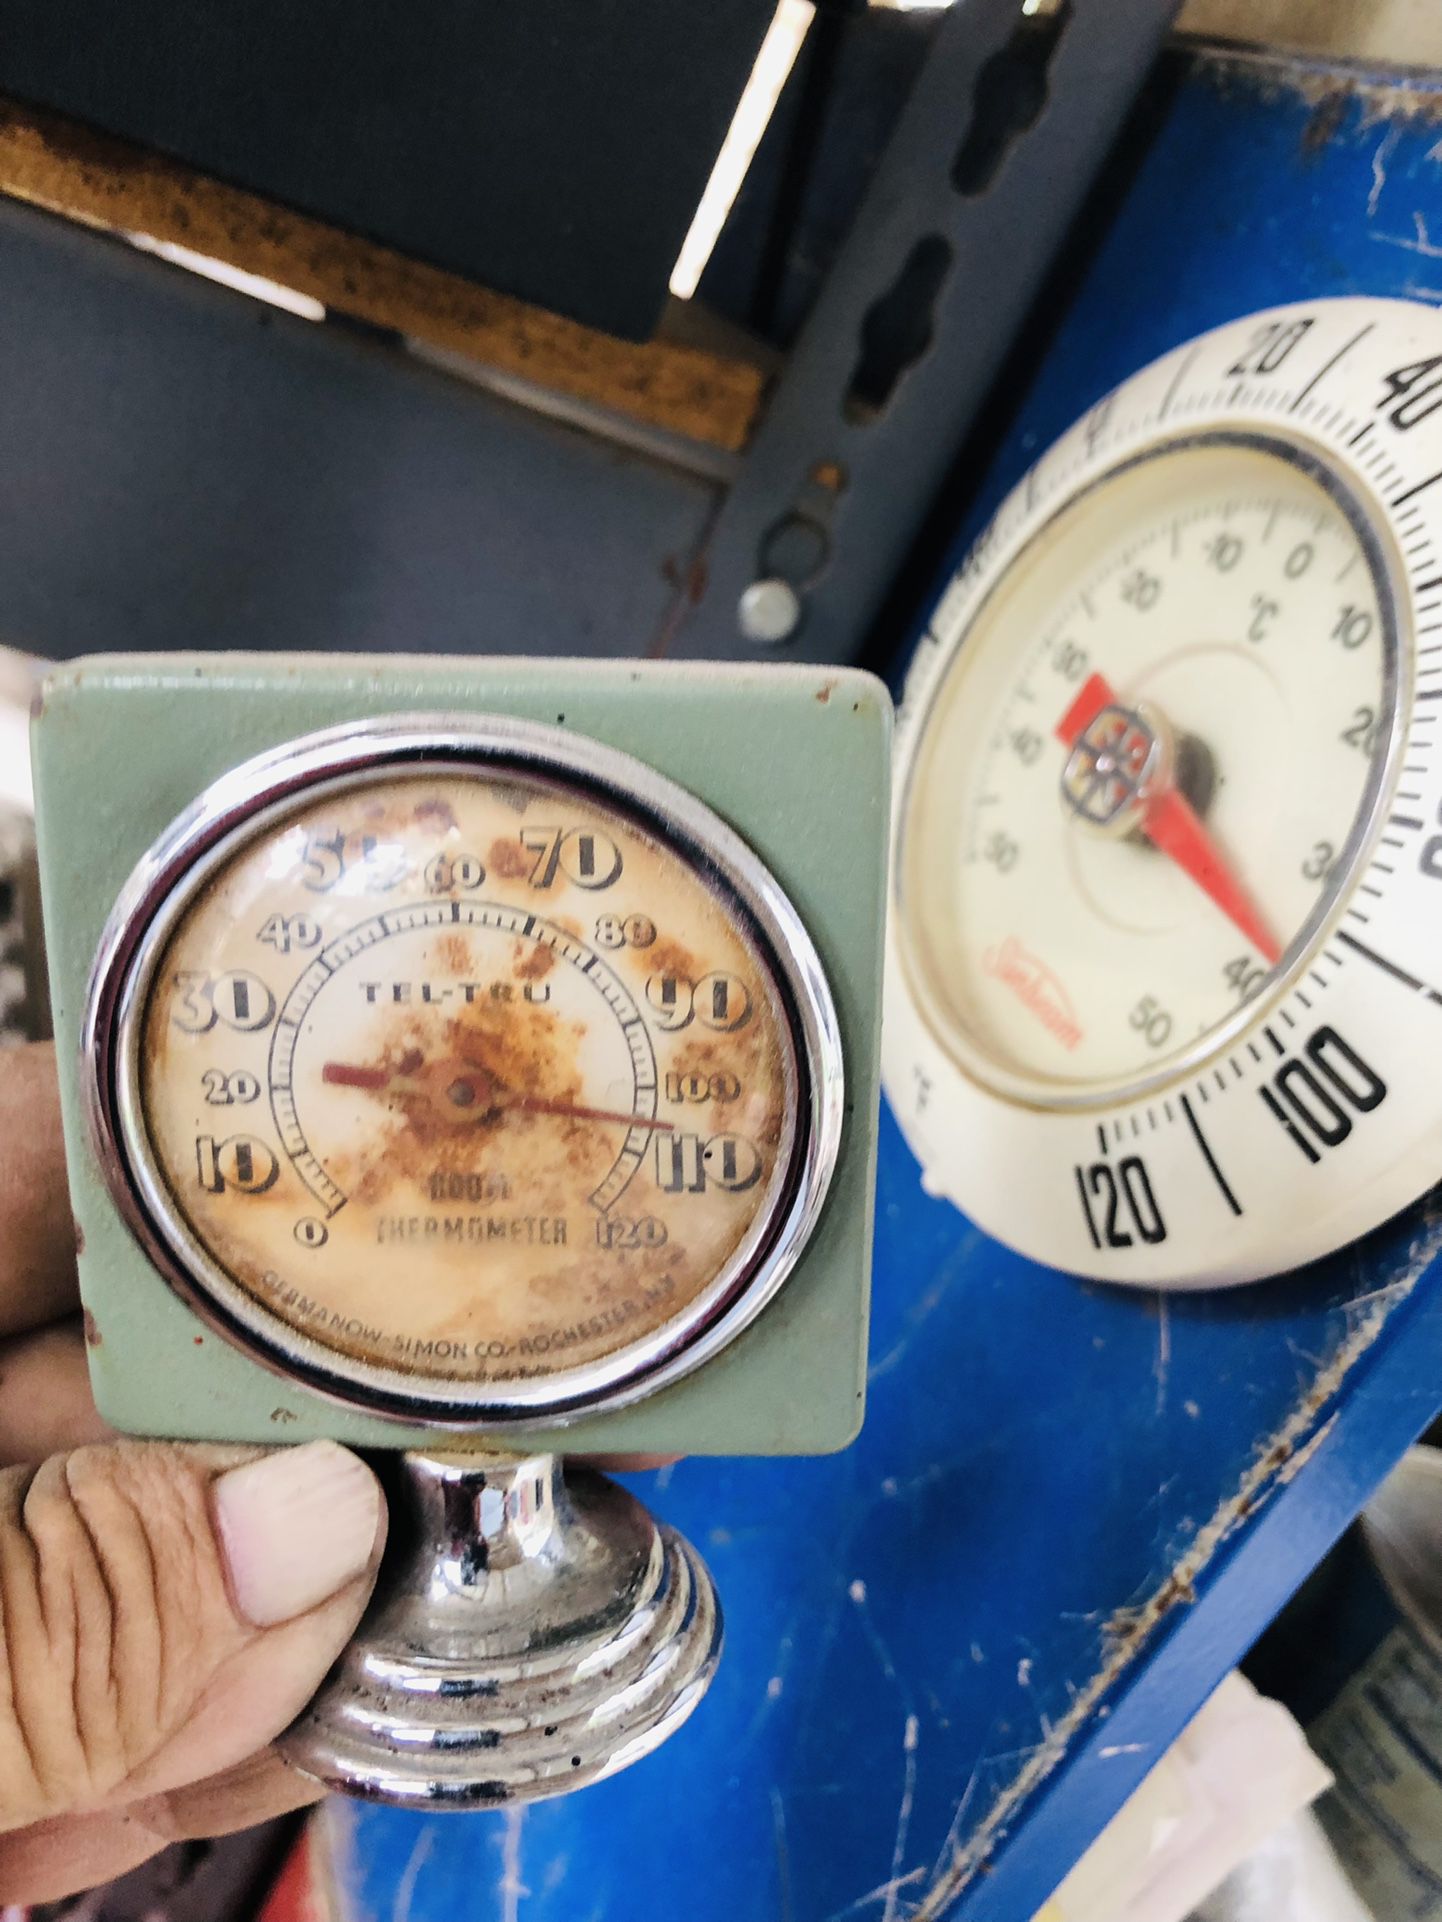 Antique temperature gauges one stands up magnetically the other one sticks to flat surface both work